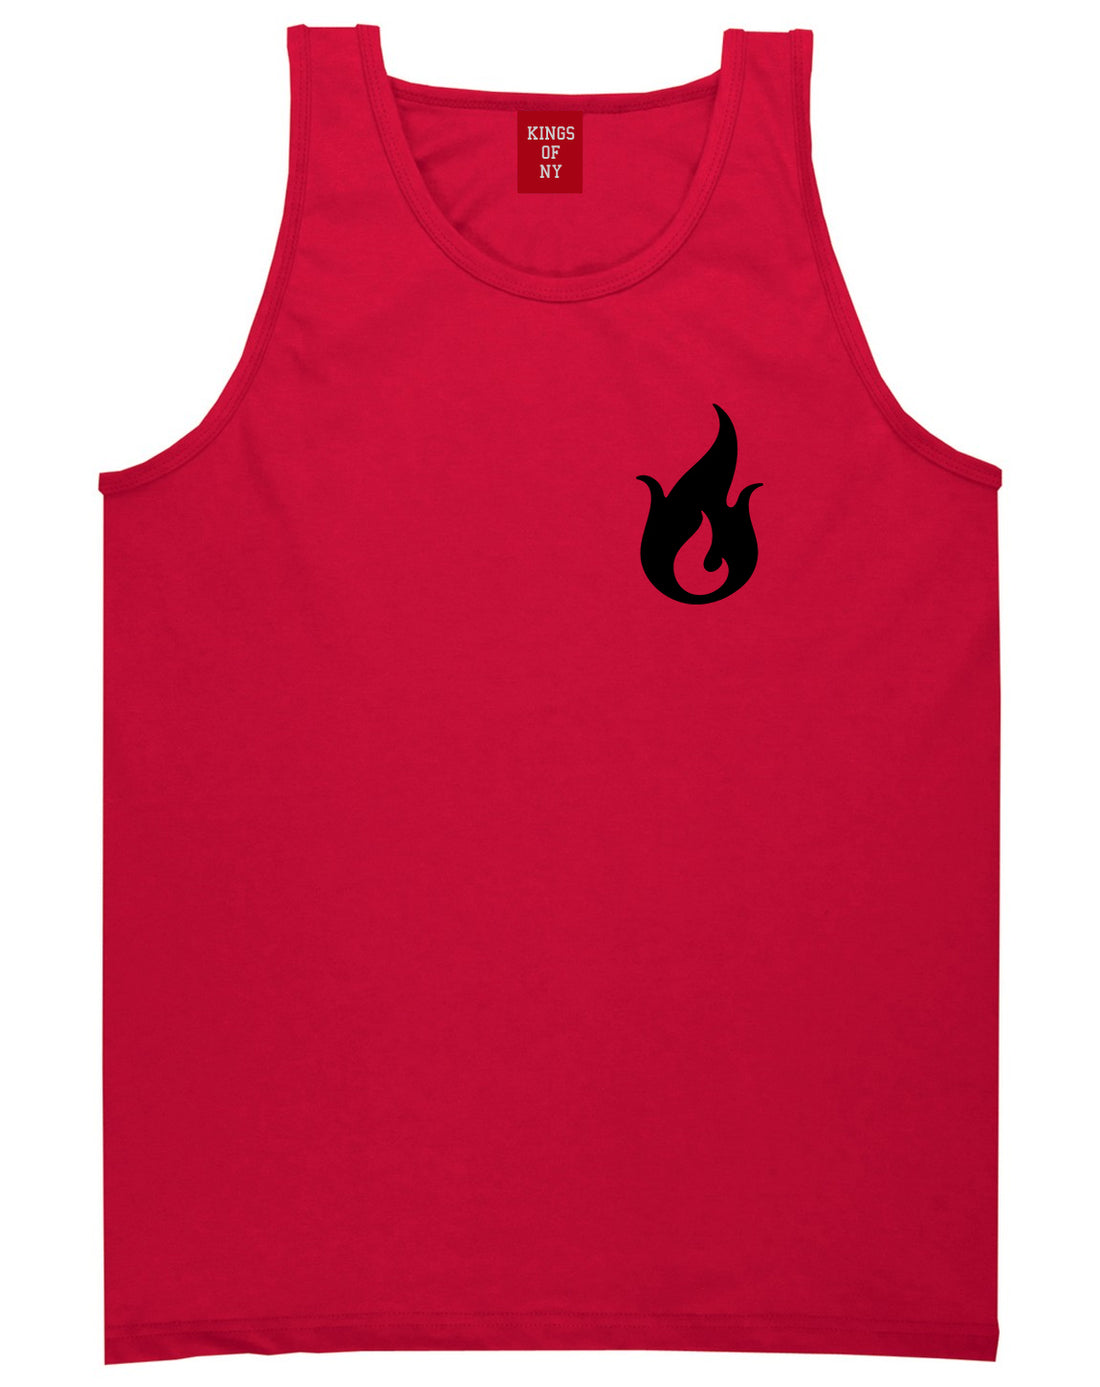 Fire Emoji Chest Mens Red Tank Top Shirt by KINGS OF NY